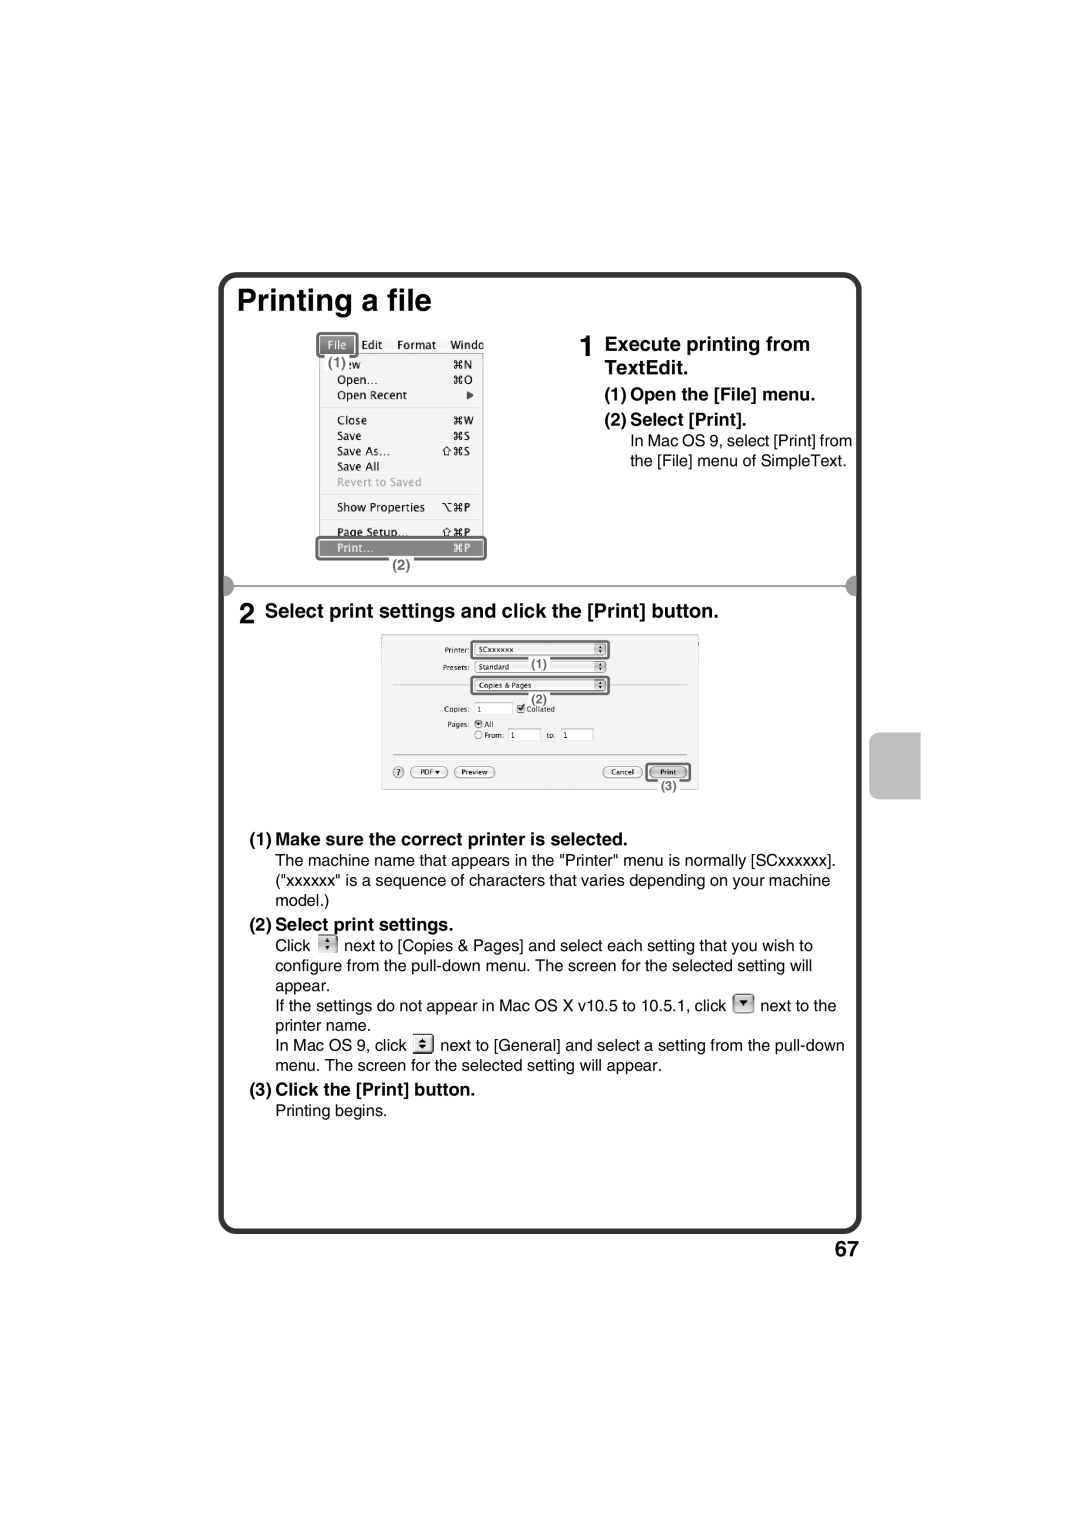 Sharp MX-C381, MX-C311 Printing a file, Execute printing from TextEdit, Select print settings and click the Print button 